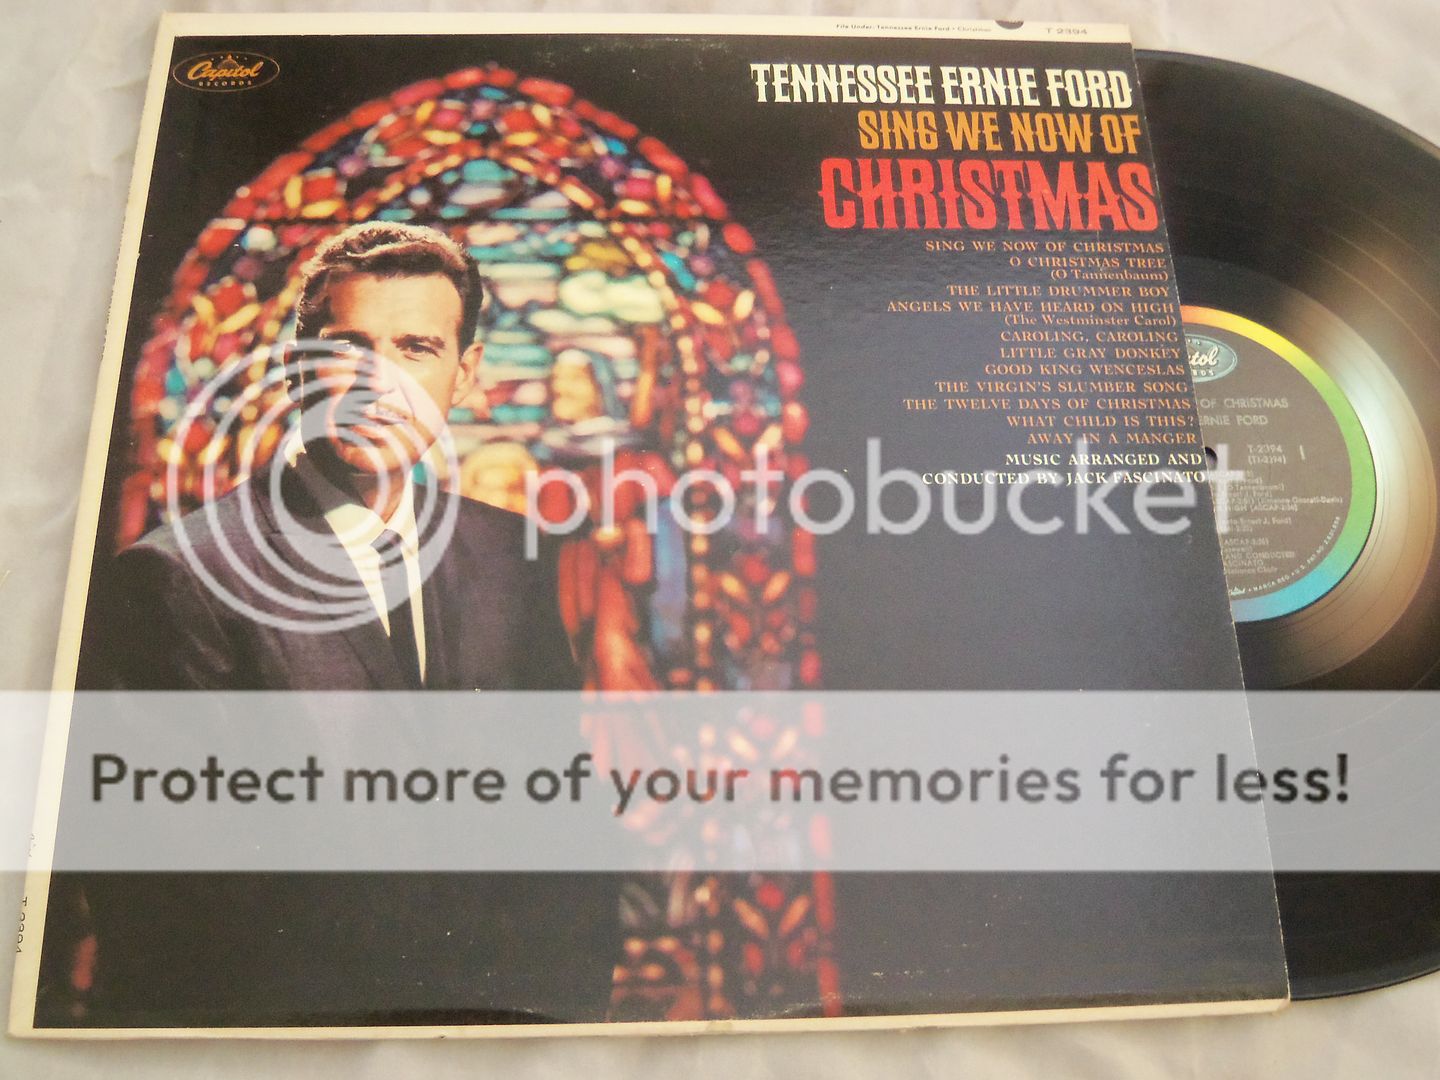 Tennessee ernie ford sing we now of christmas mp3 #3